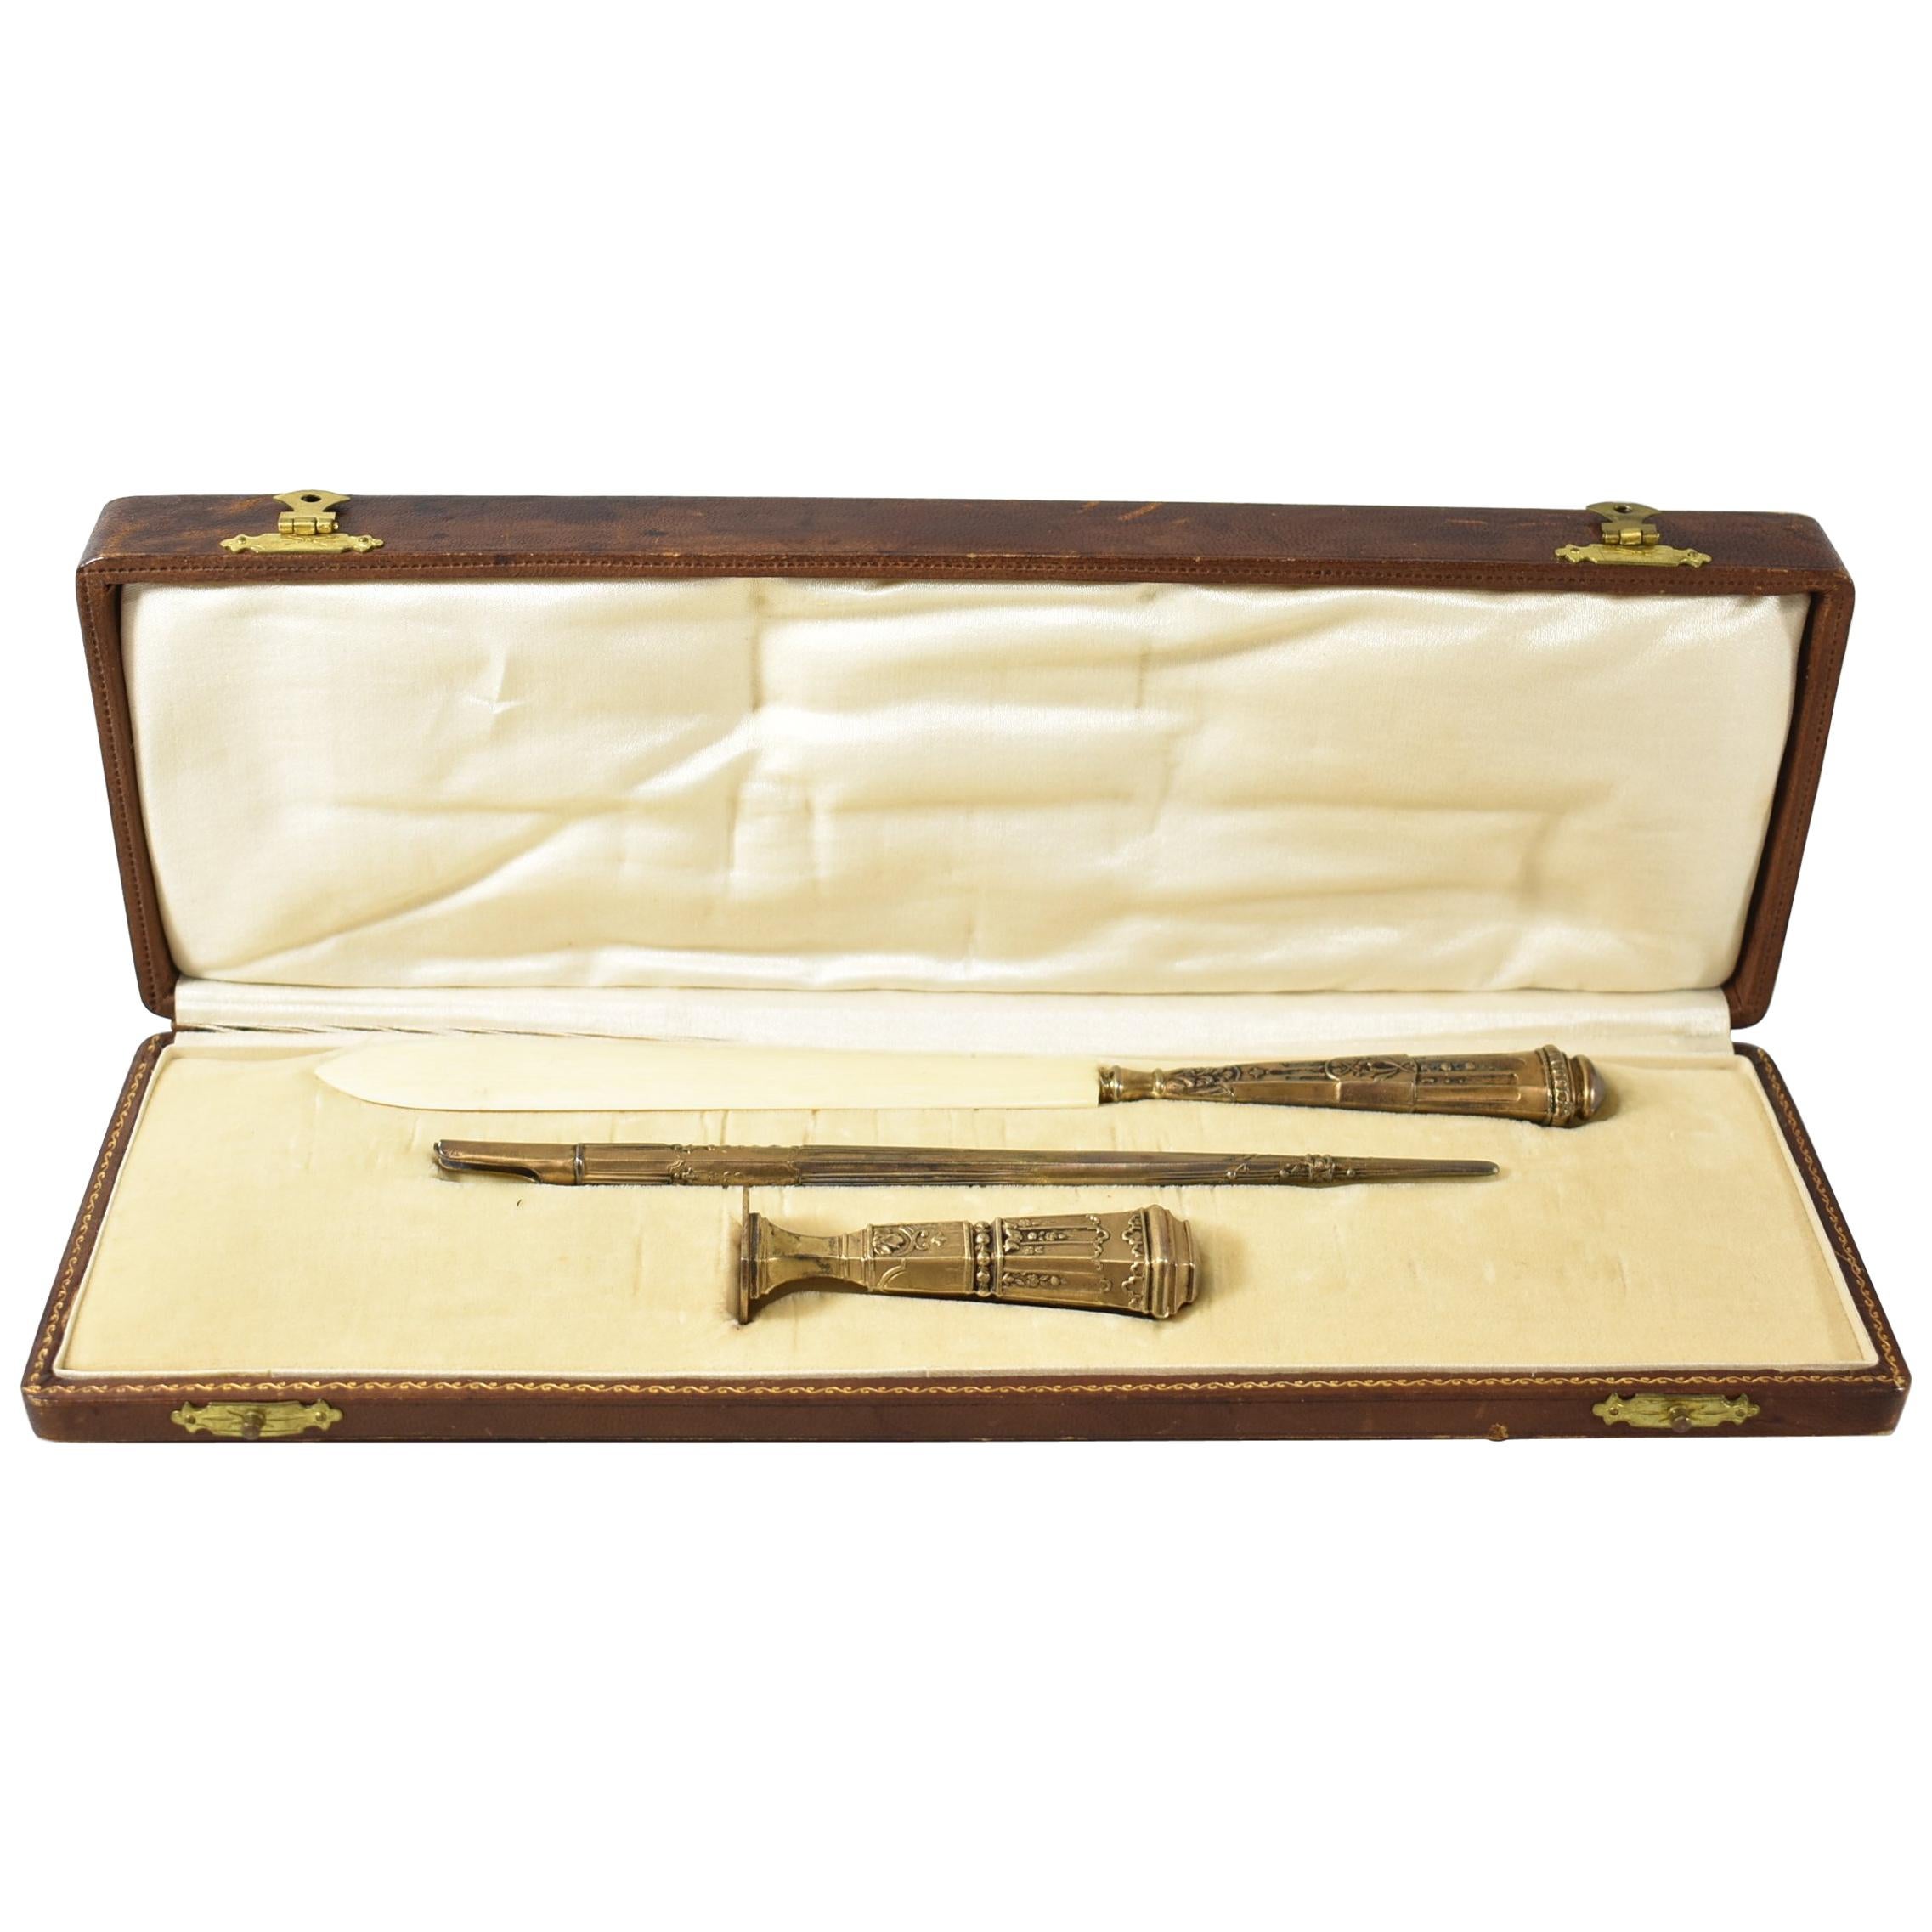 French Empire Boxed Writing Set Made in France